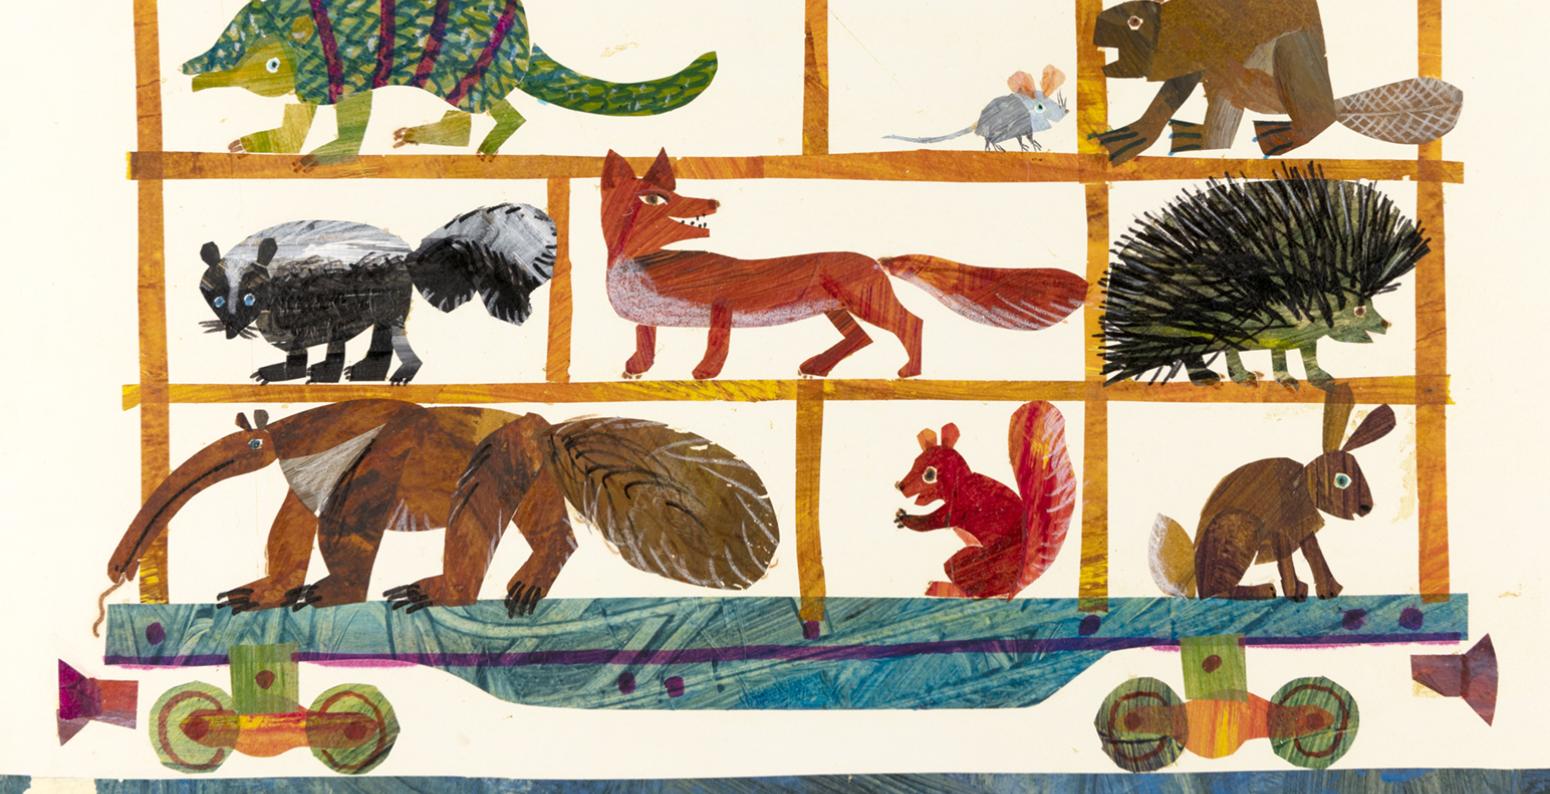 Nine animals are in a train car 